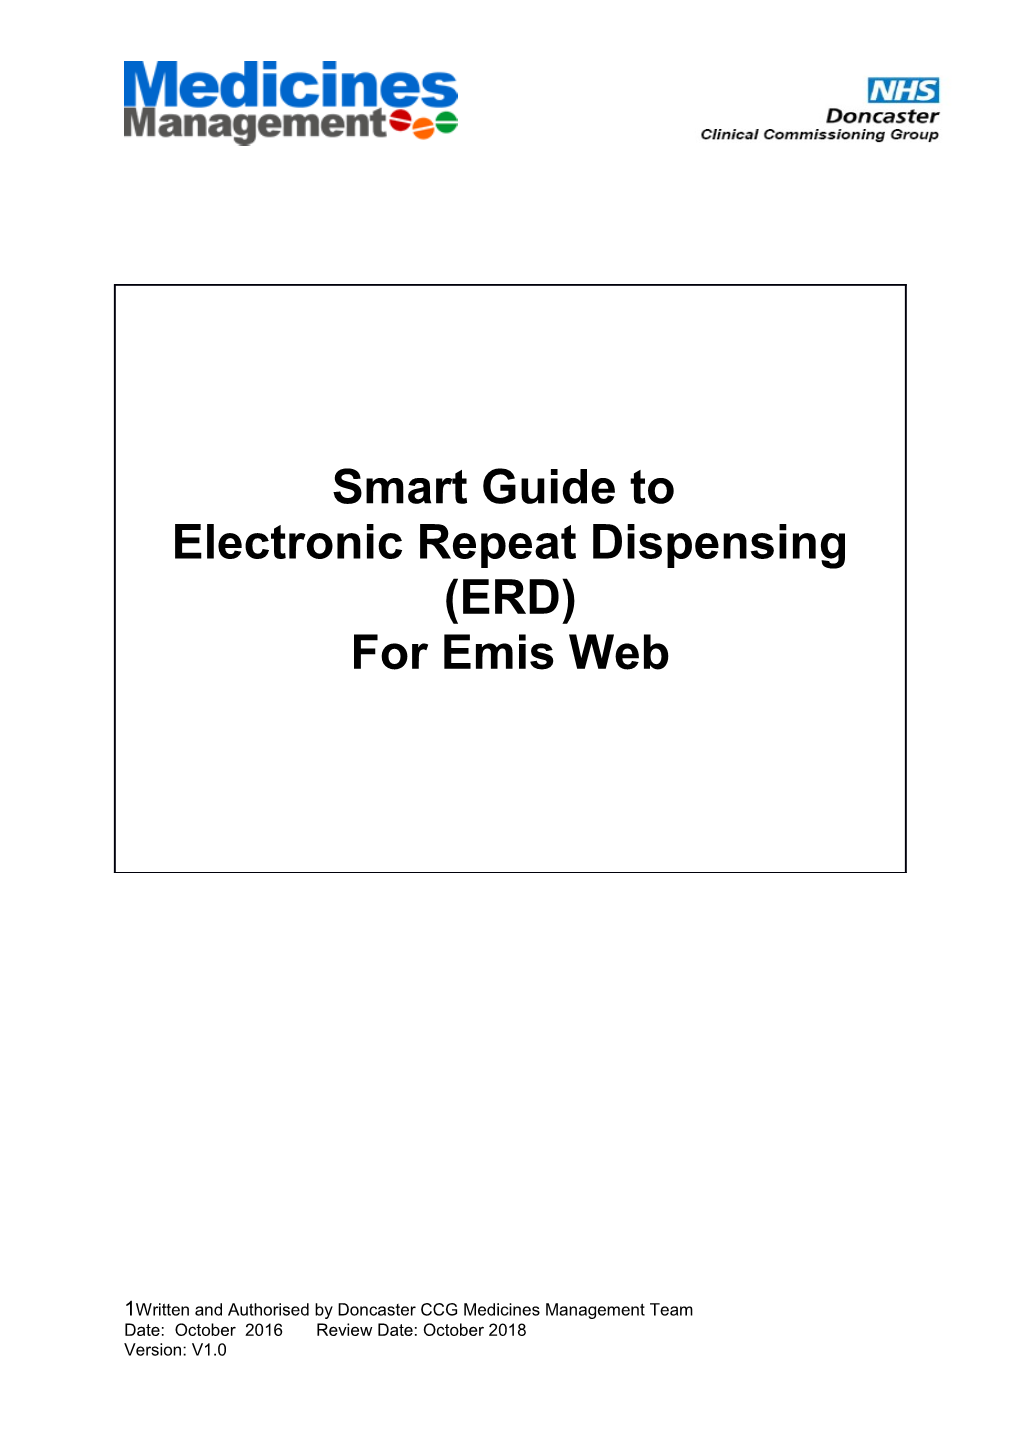 Smart Guide to Electronic Repeat Dispensing (ERD)